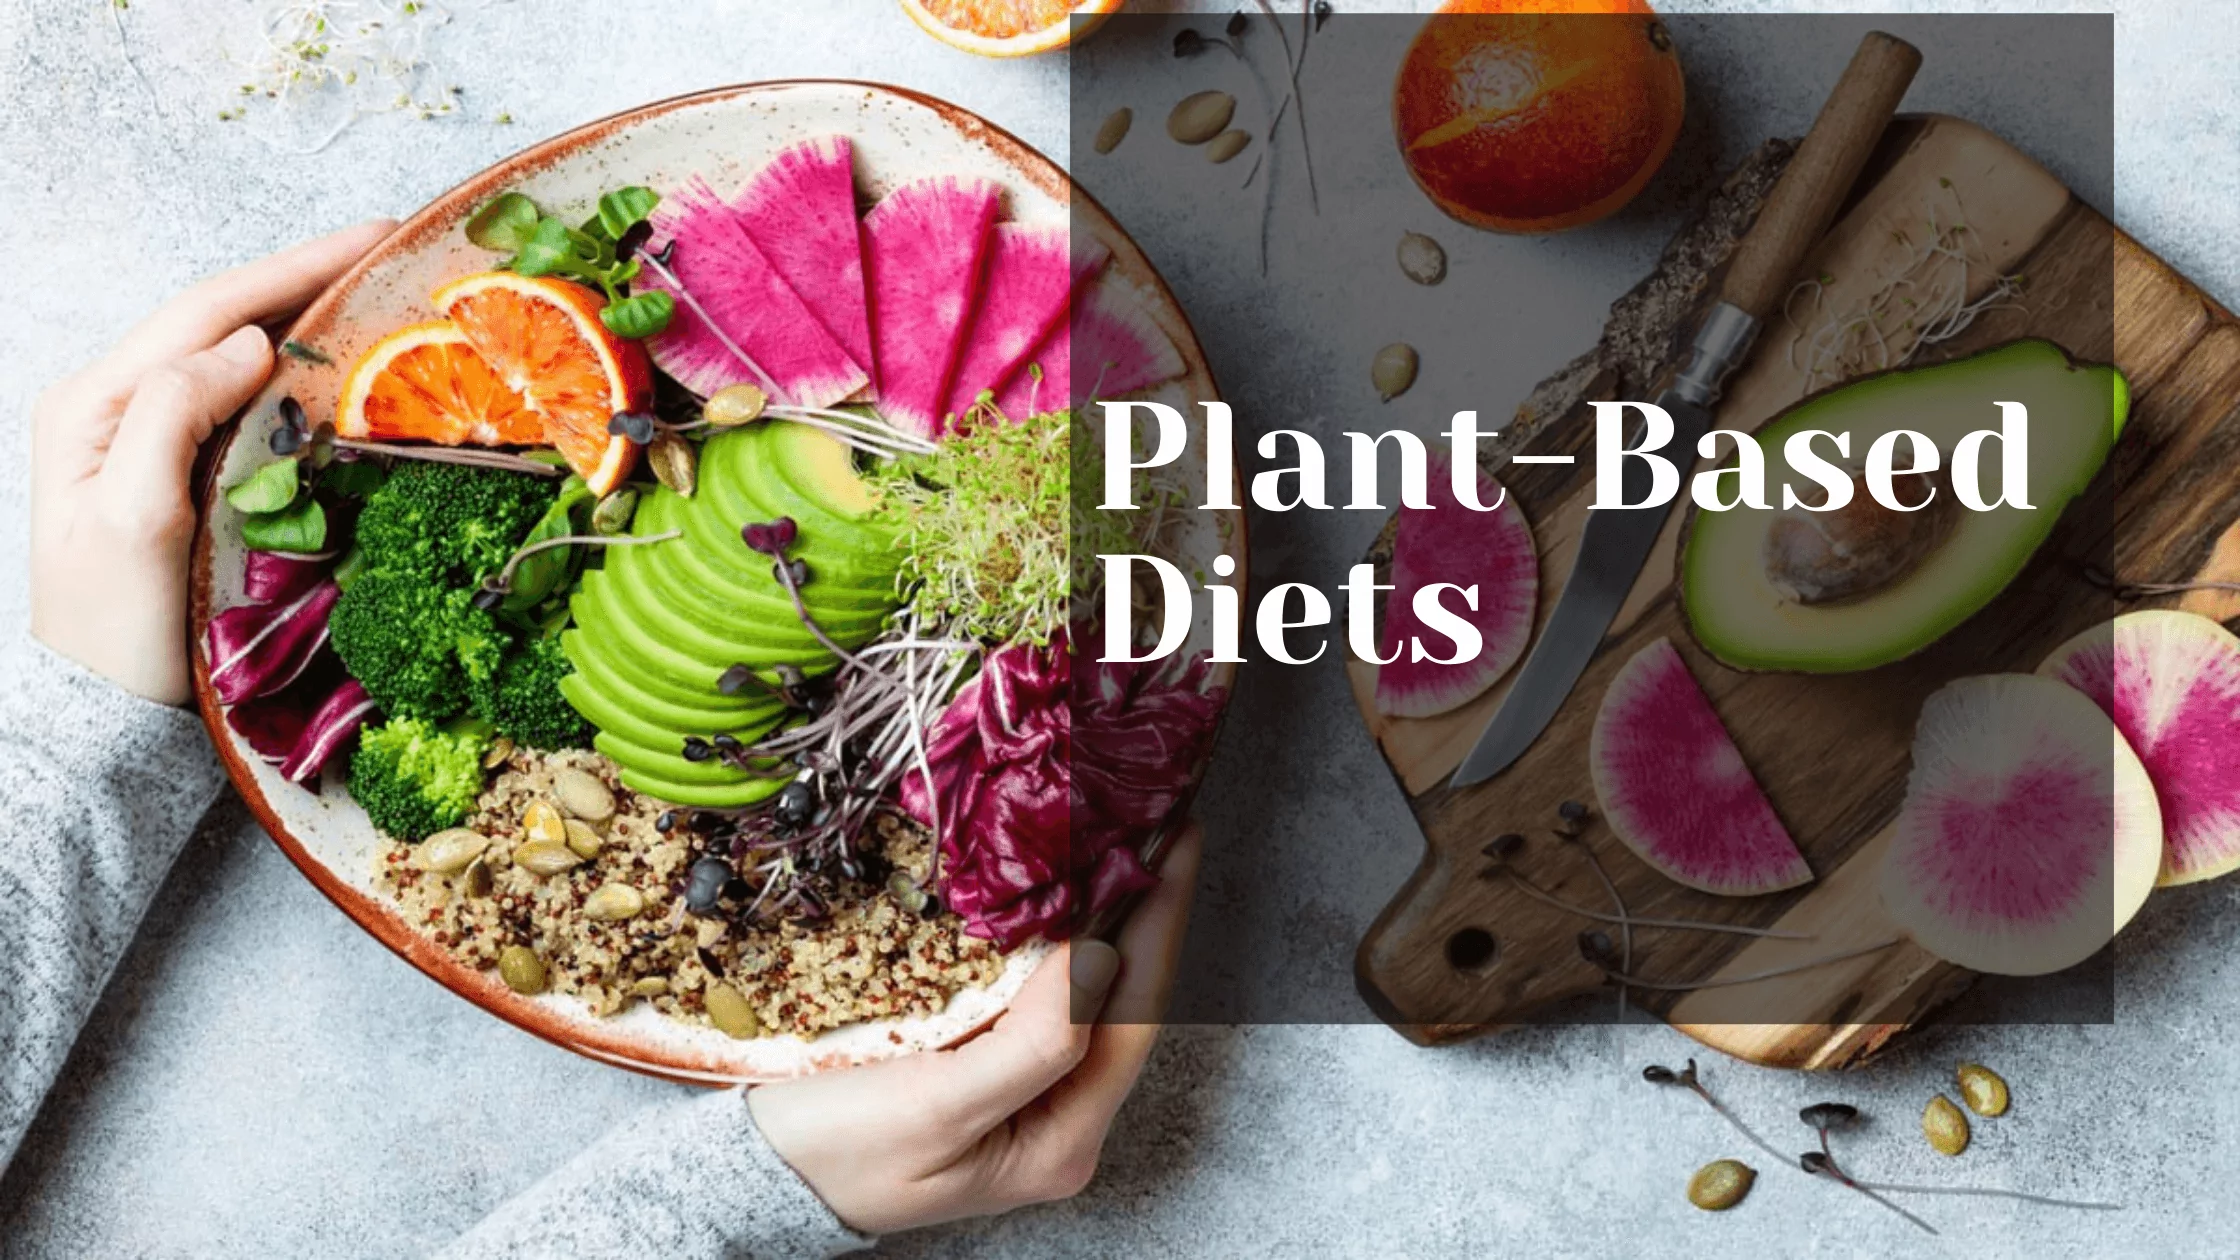 Plant-Based Diets and Your Cholesterol